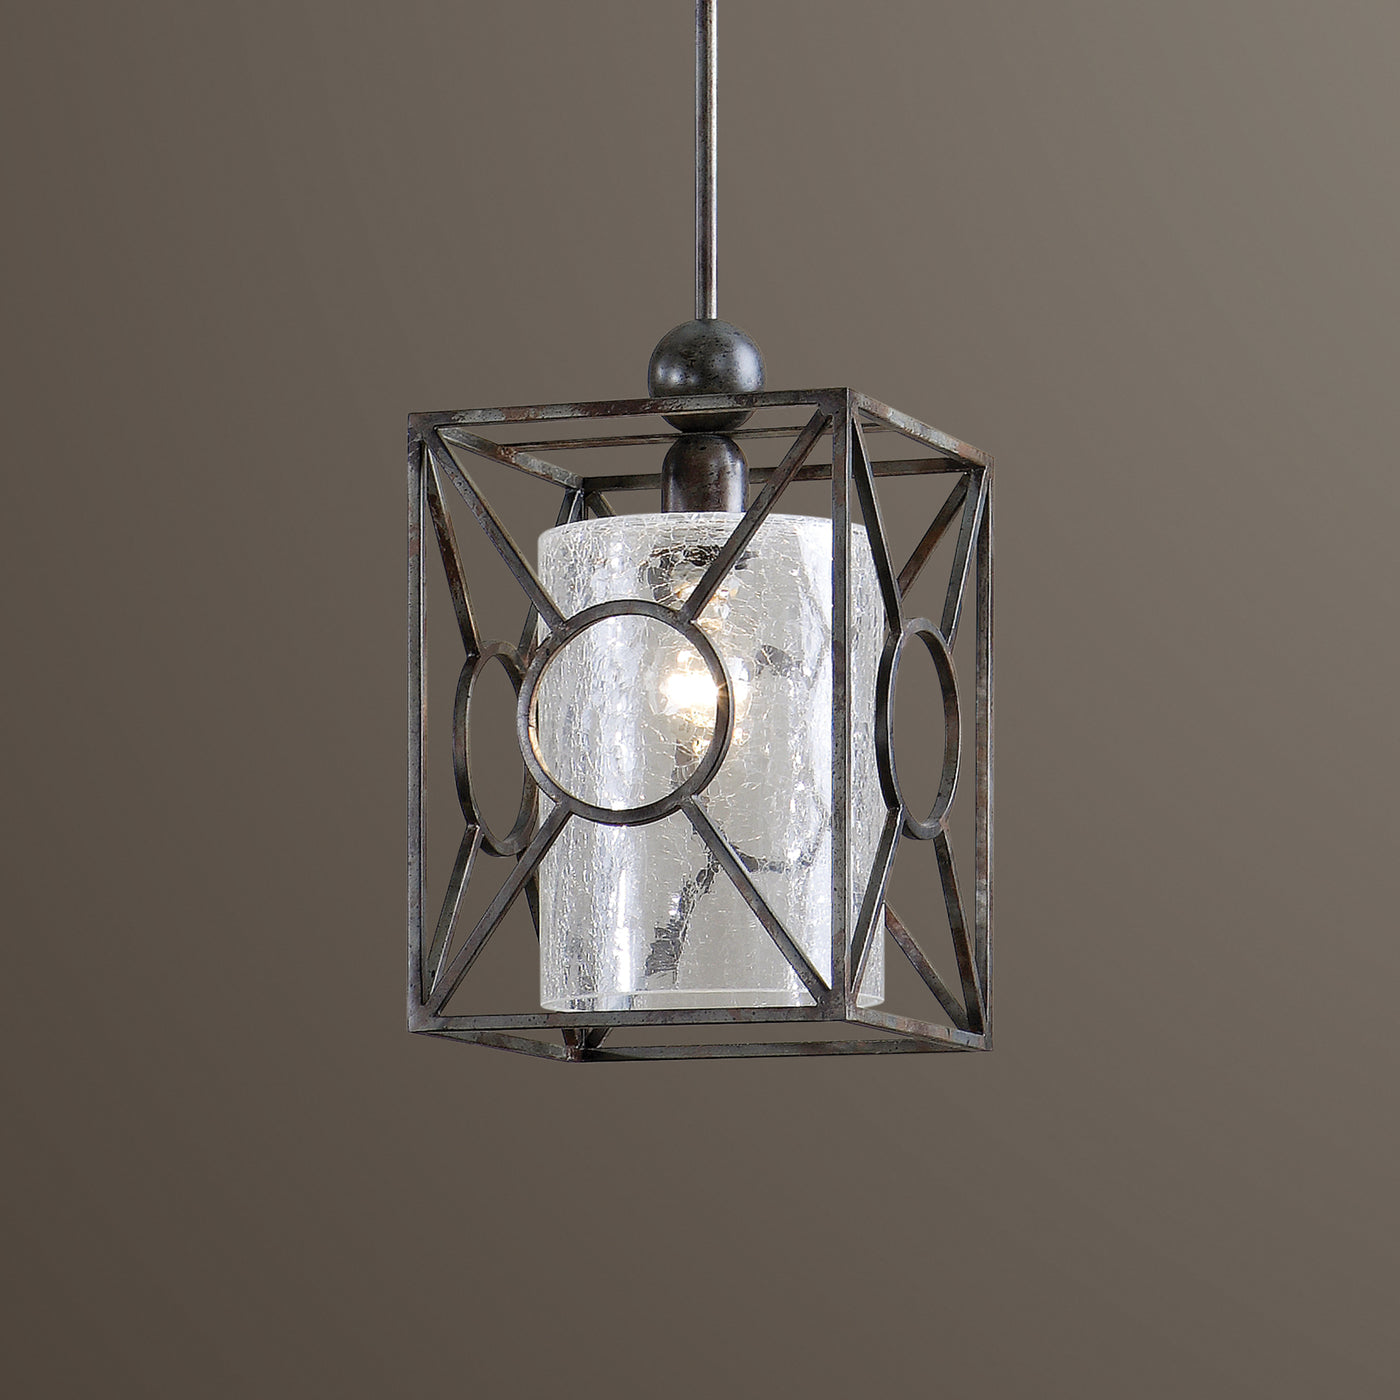 Rust Black Finish With Aged Gray Undertones And A Crackled Glass Cylinder Inner Shade.